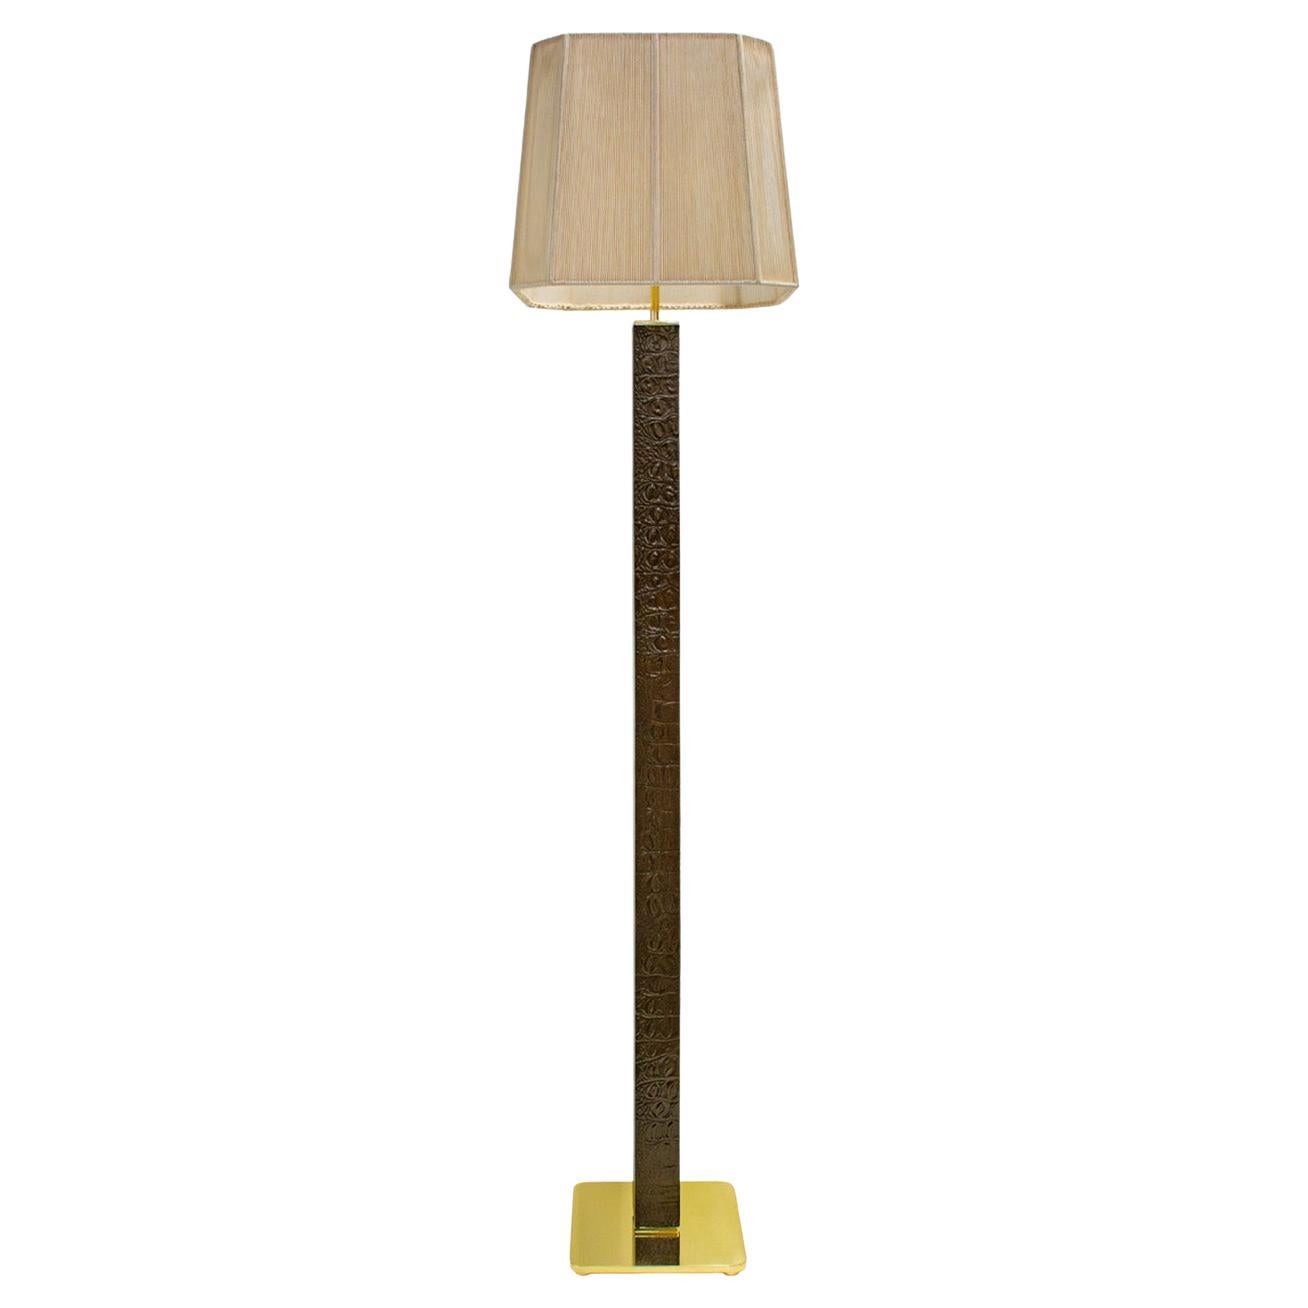 Karl Springer Floor Lamp in Deep Brown Crocodile with Brass Accents 1970s For Sale